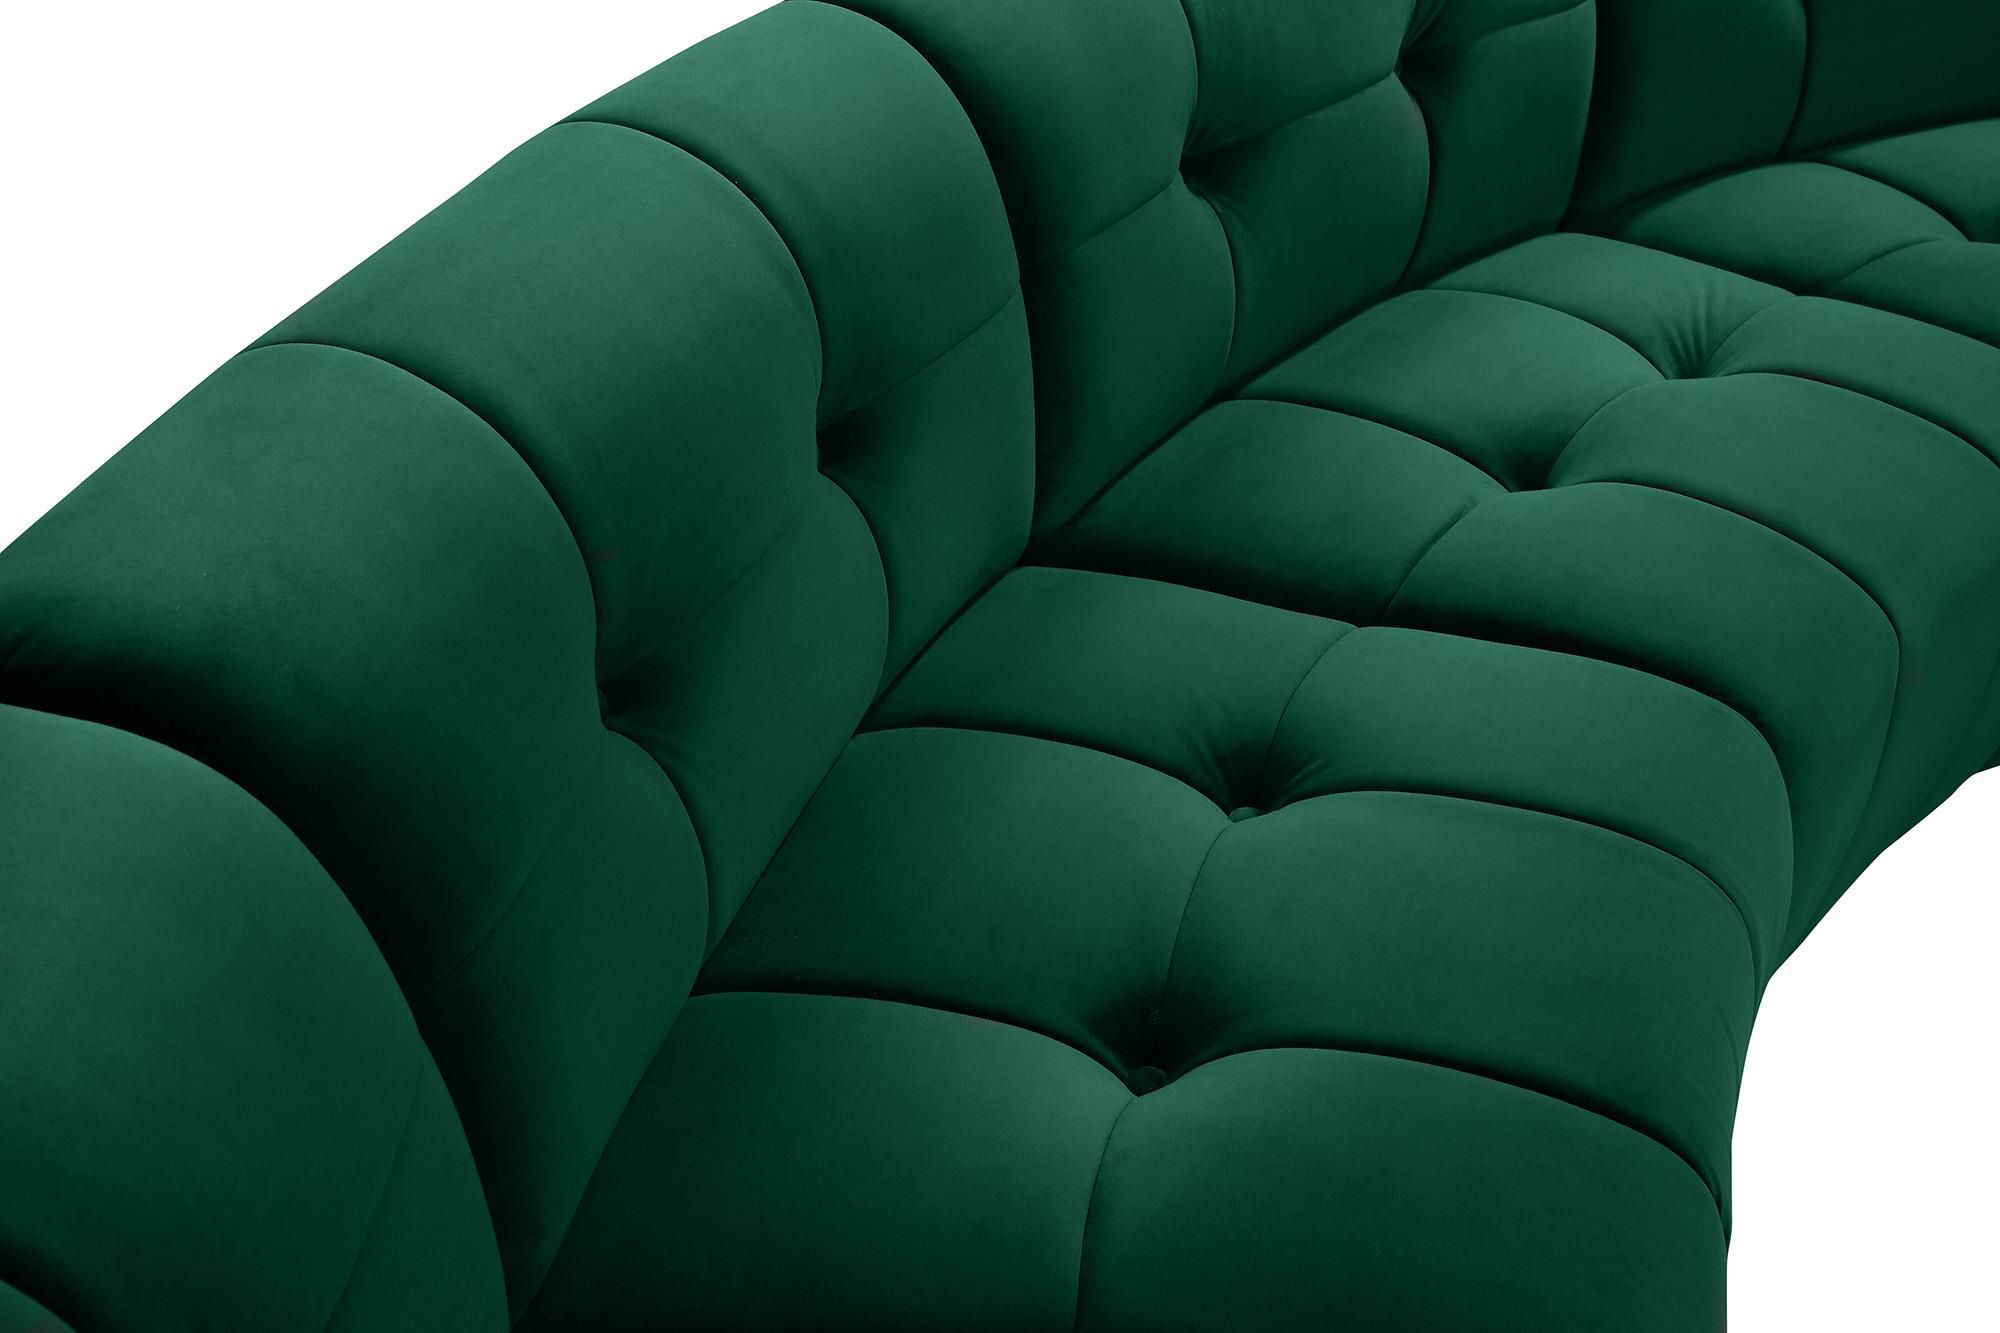 Green Velvet Modular Sectional Sofa Limitless 645green 3pc Meridian Modern  – Buy Online On Ny Furniture Outlet With Regard To Green Velvet Modular Sectionals (View 13 of 15)